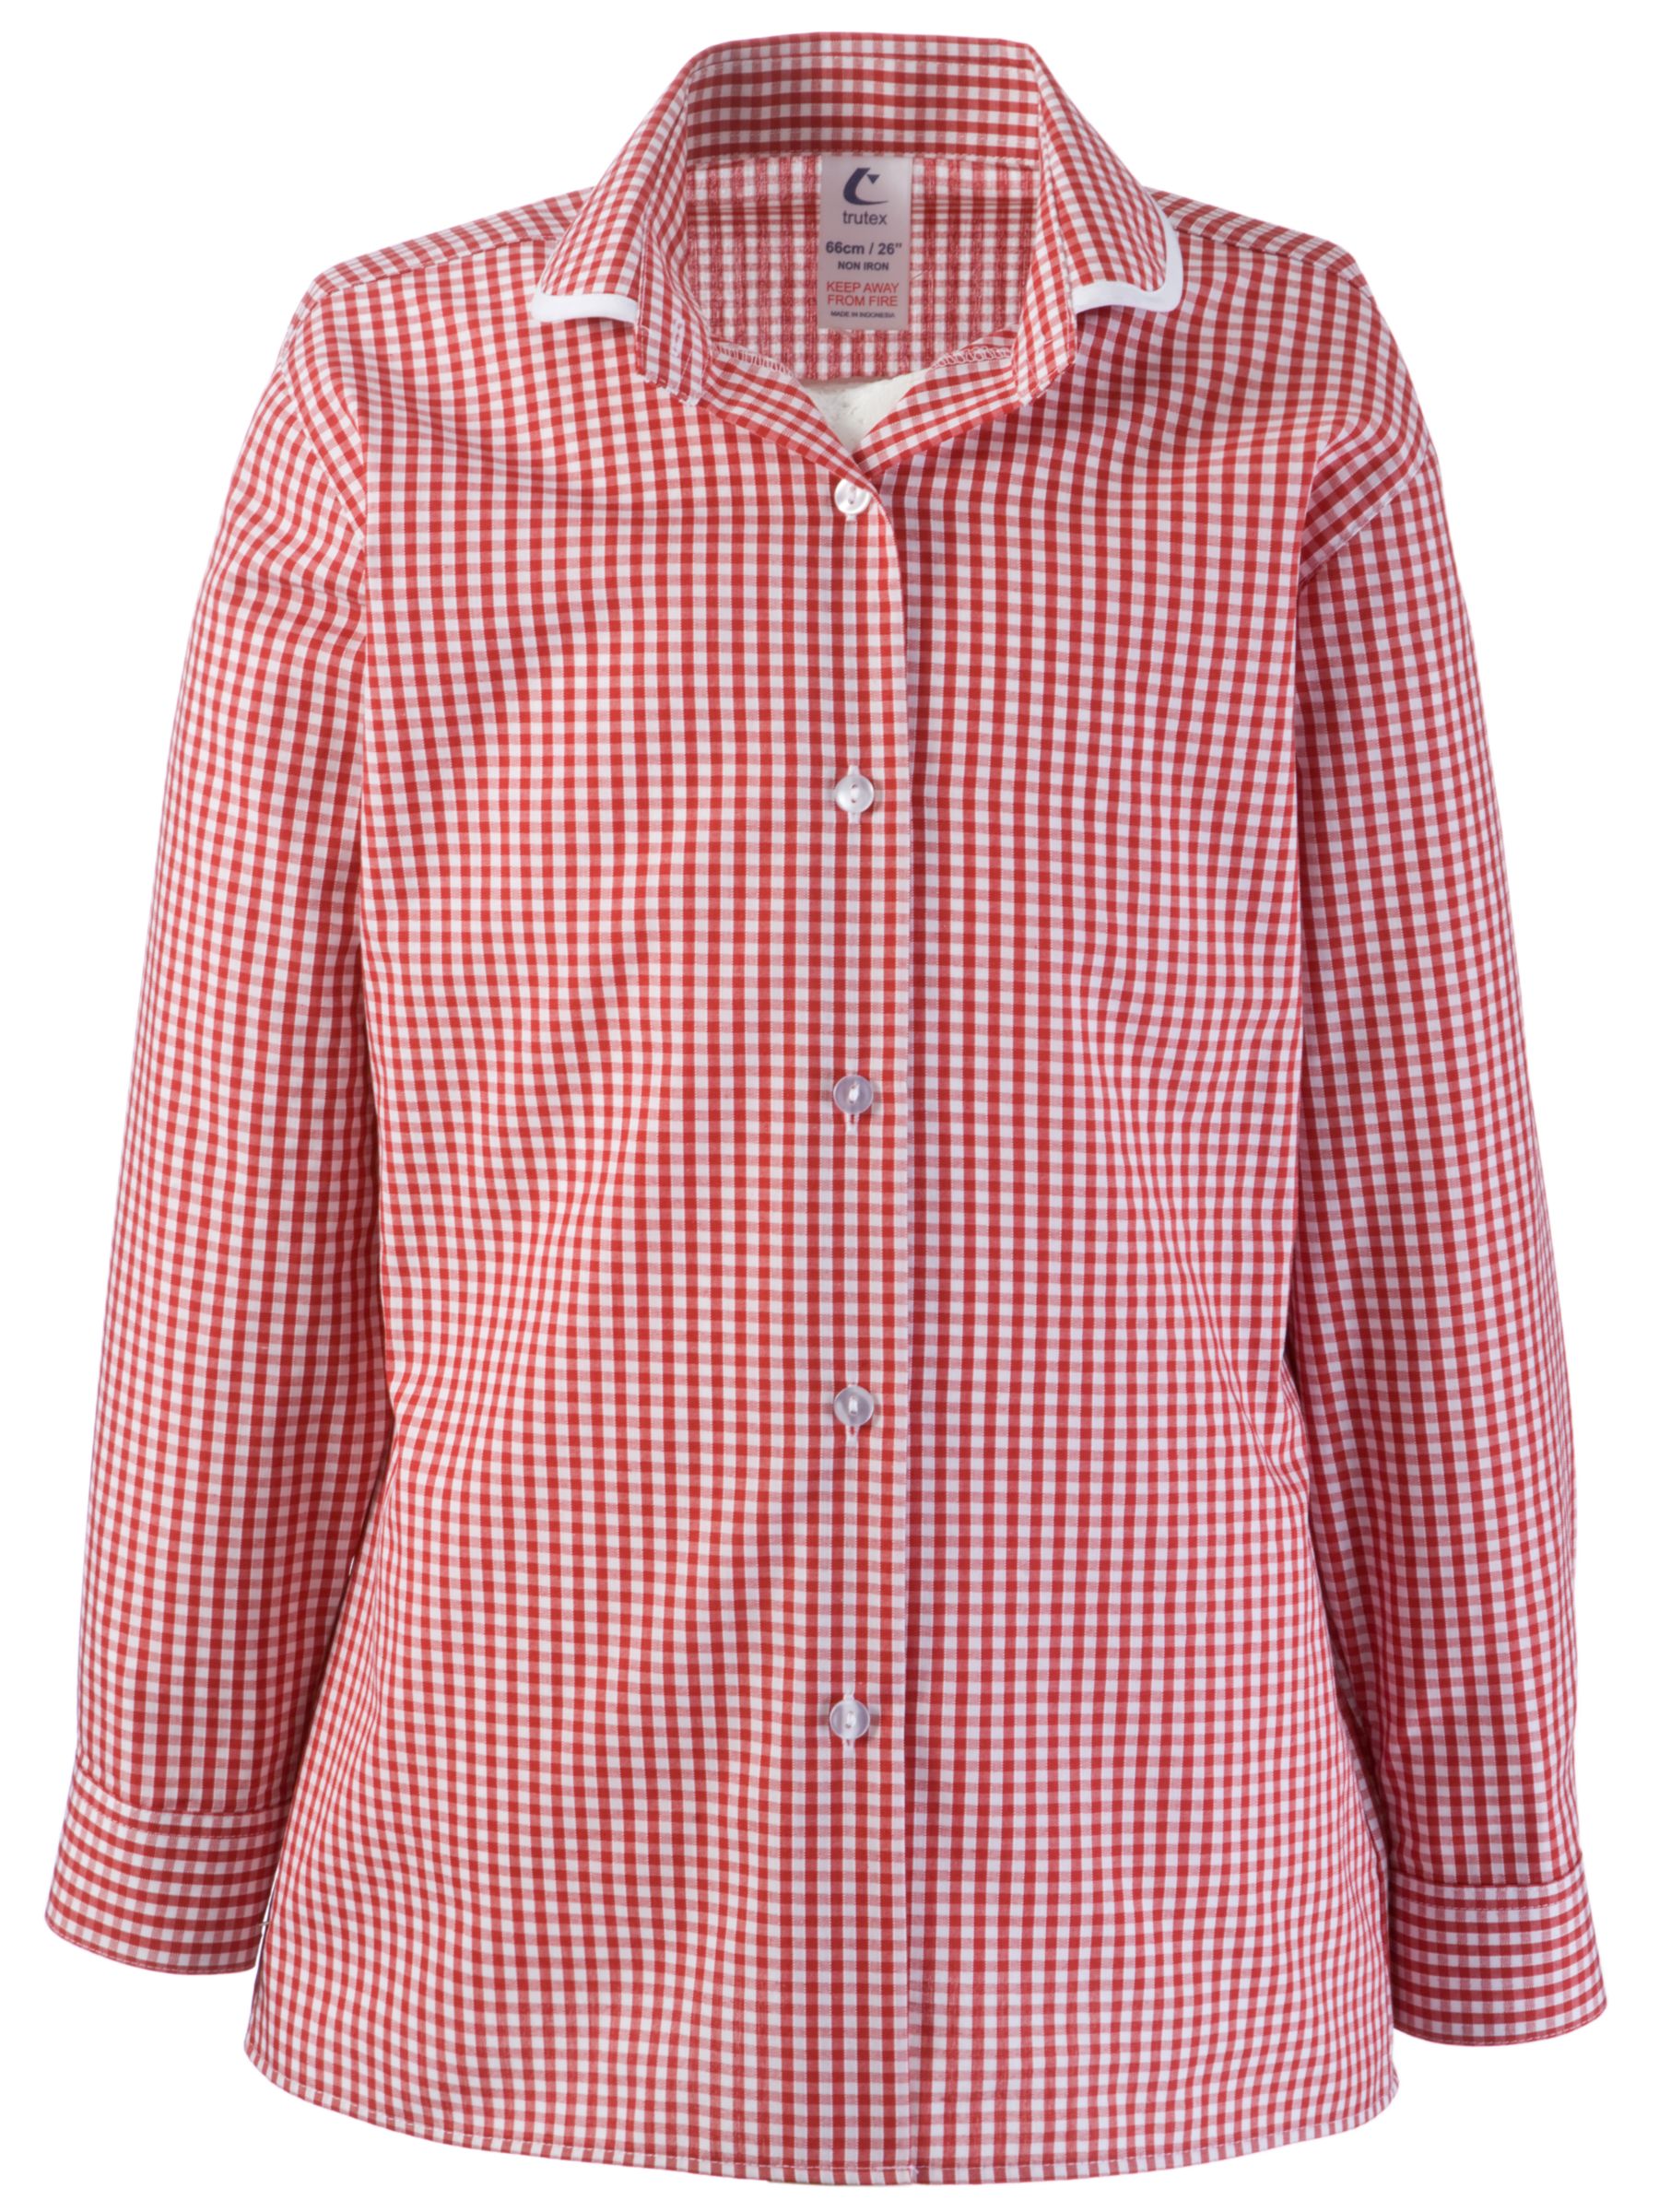 Other Schools School Girls Gingham Blouse, Twin Pack, Red